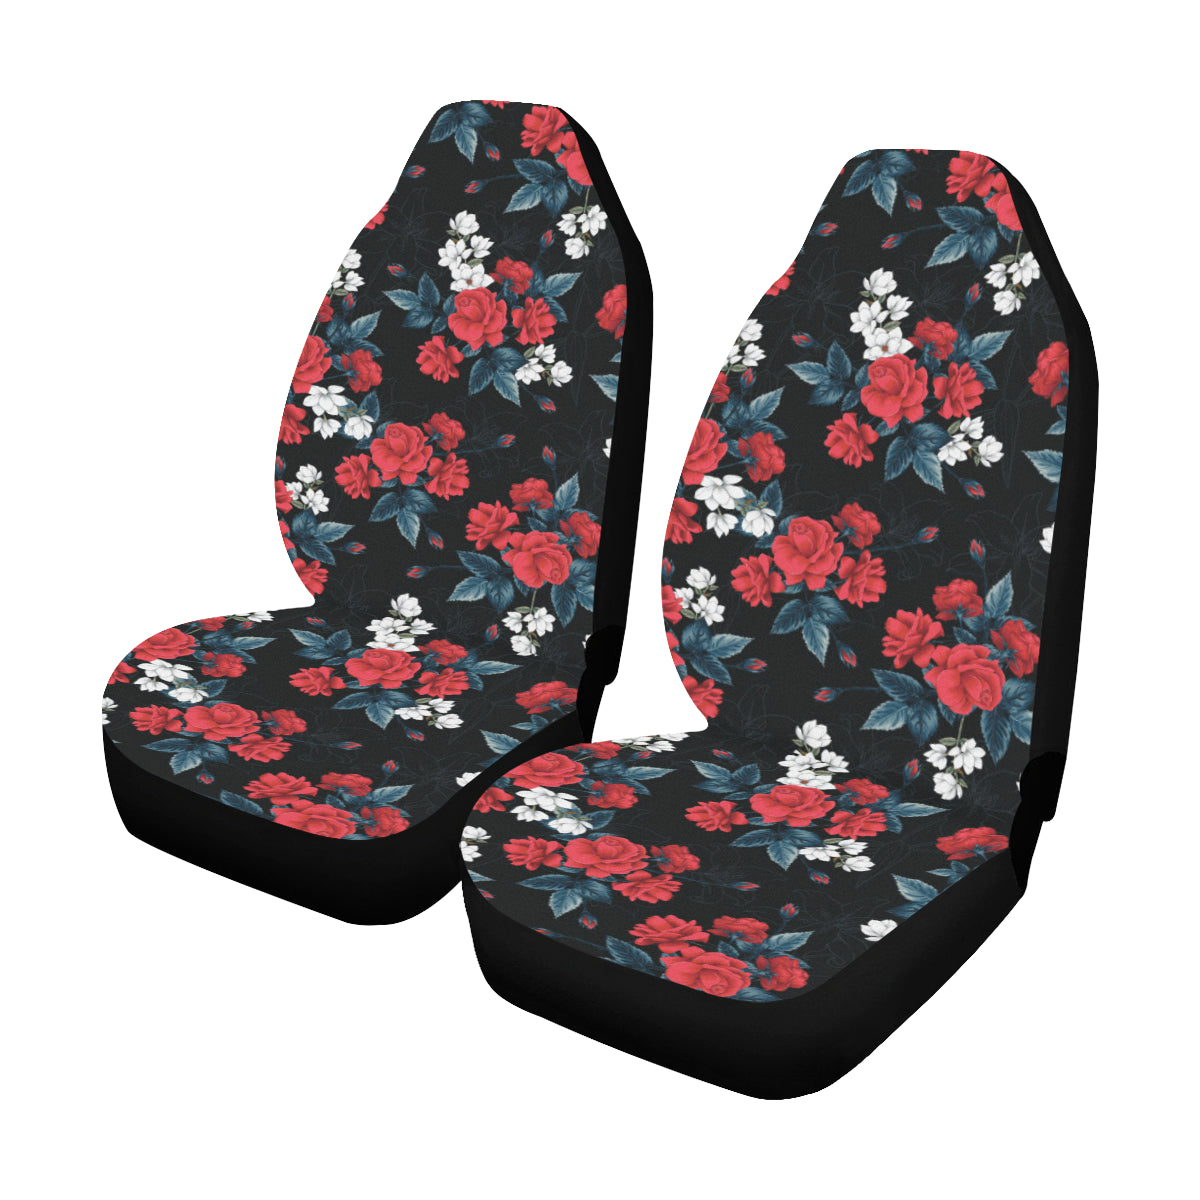 Red Roses Car Seat Cover 2 pc, Floral Pretty Magnolia Front Seat Covers, Car SUV Vans Seat Protector Accessory Starcove Fashion